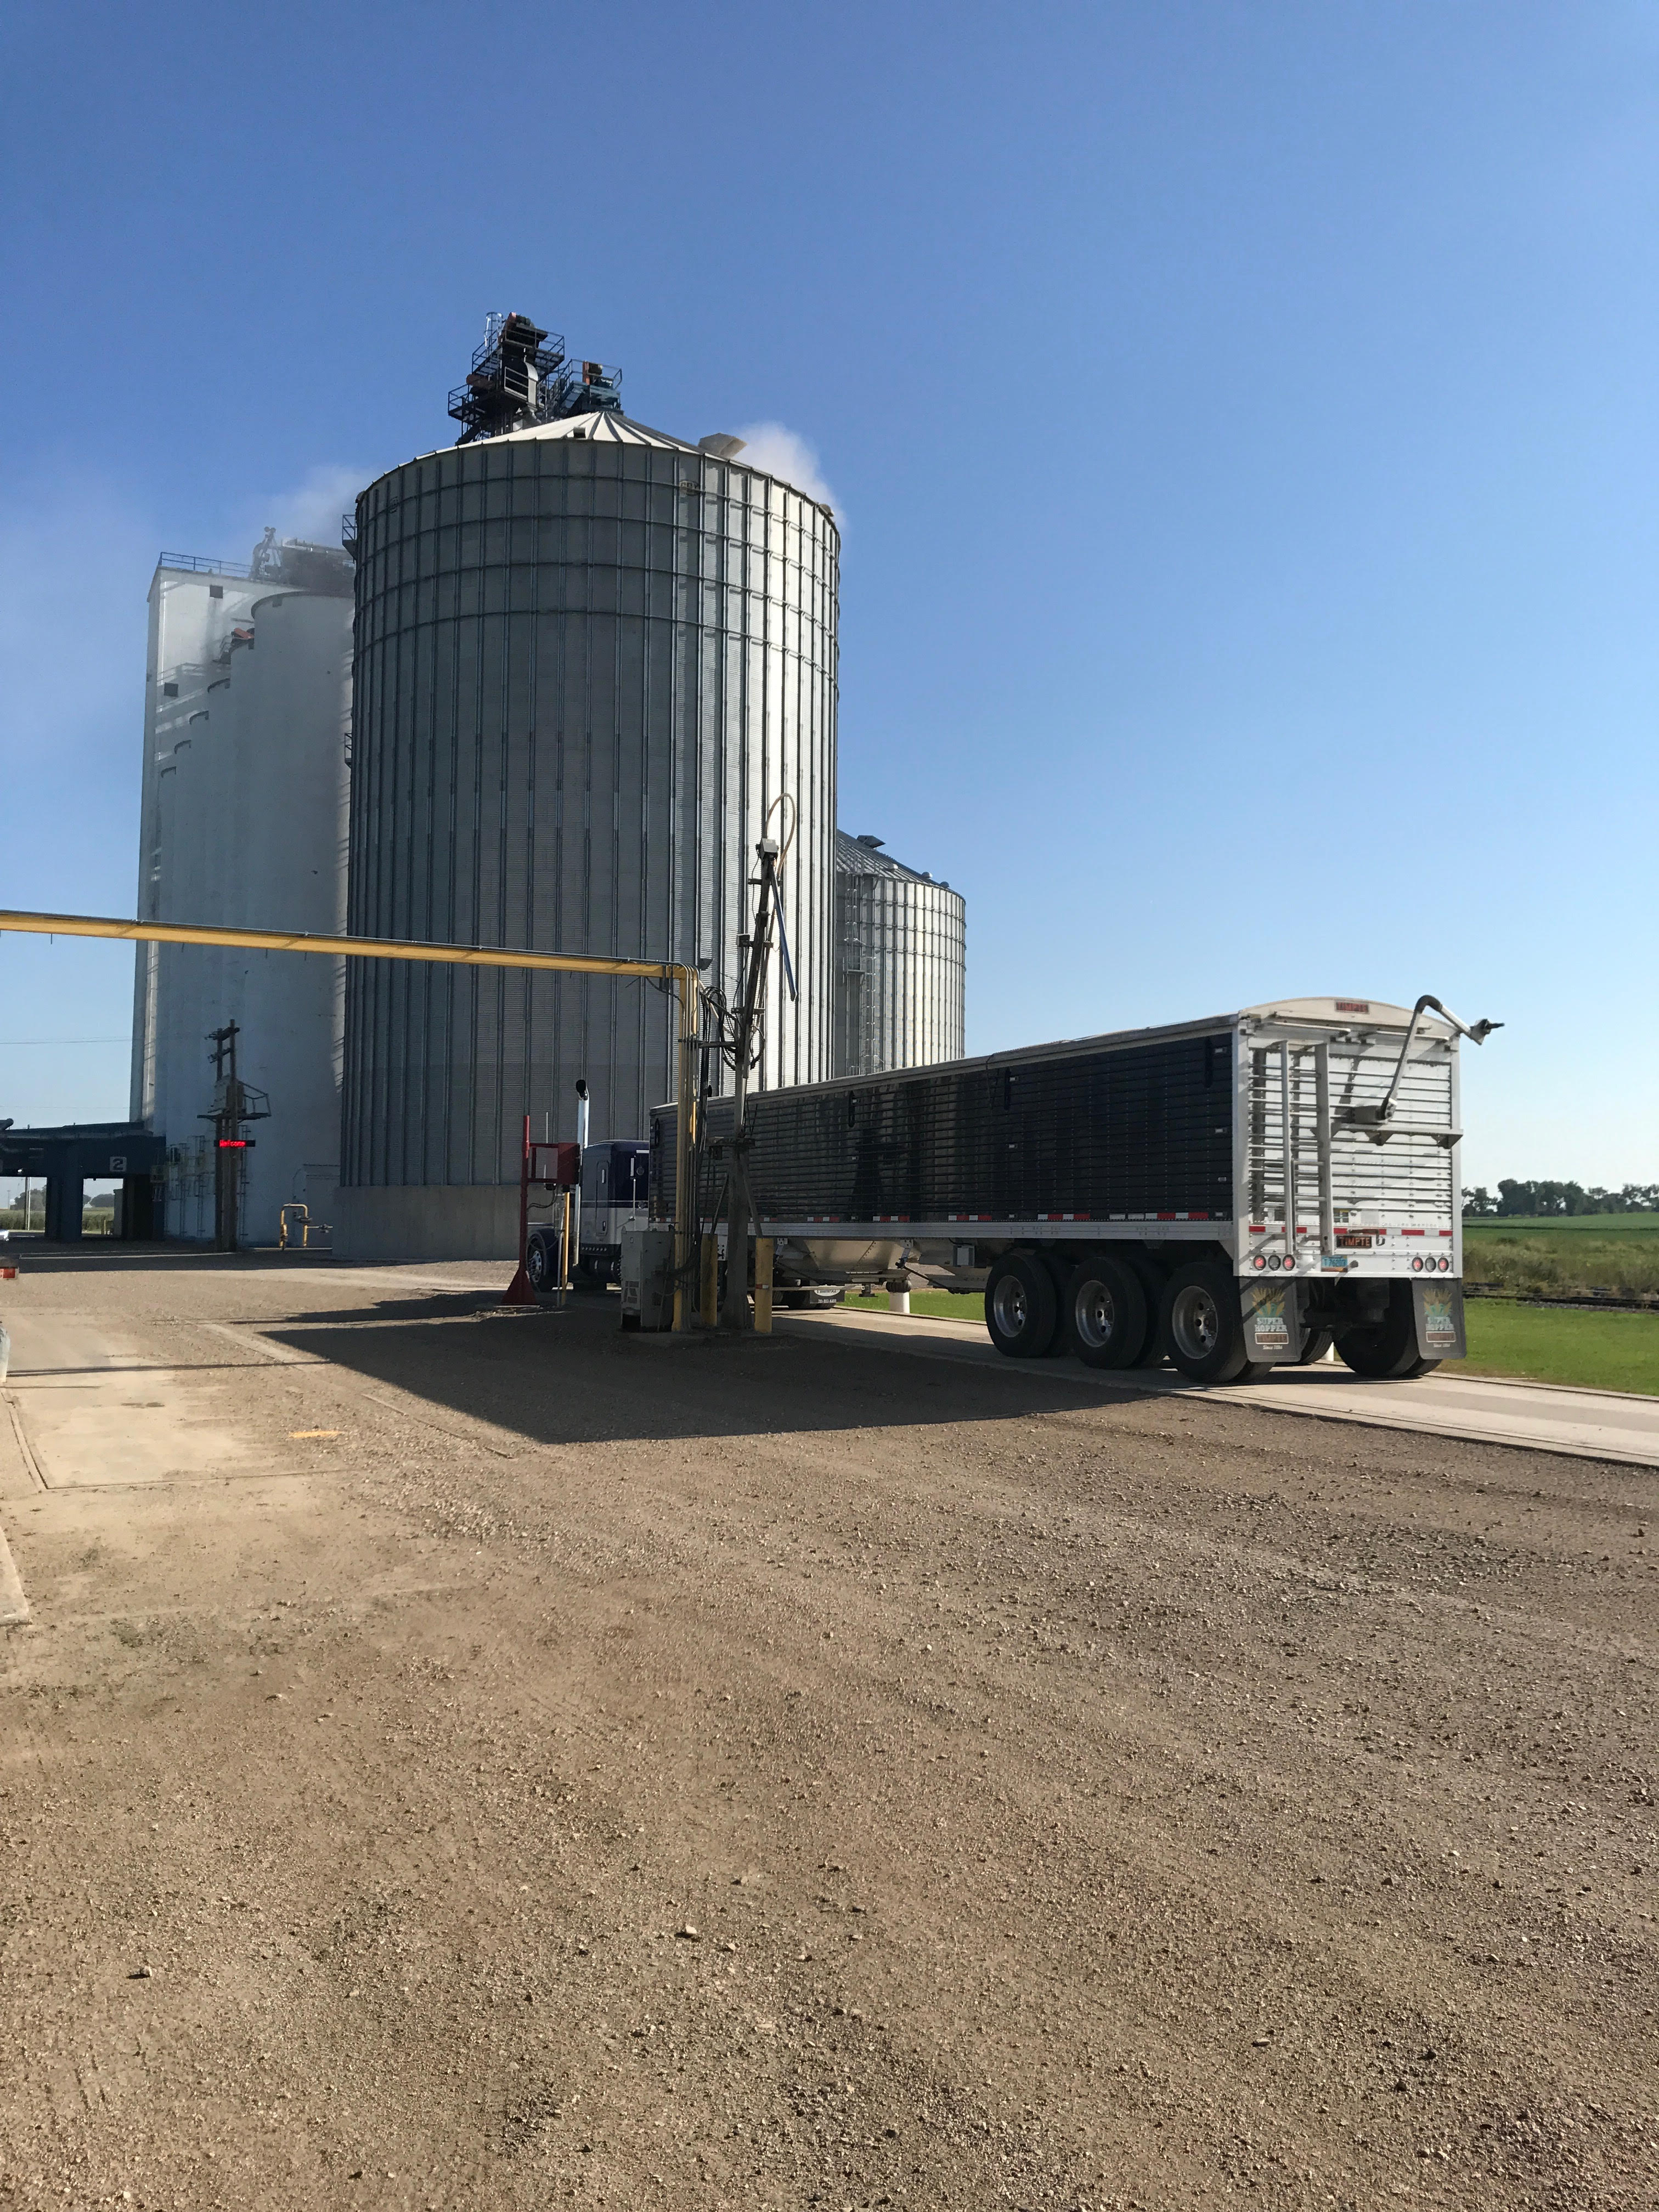 Mid-morning Ag News, March 3, 2022: Farmer sentiment rises during recent grain market rally